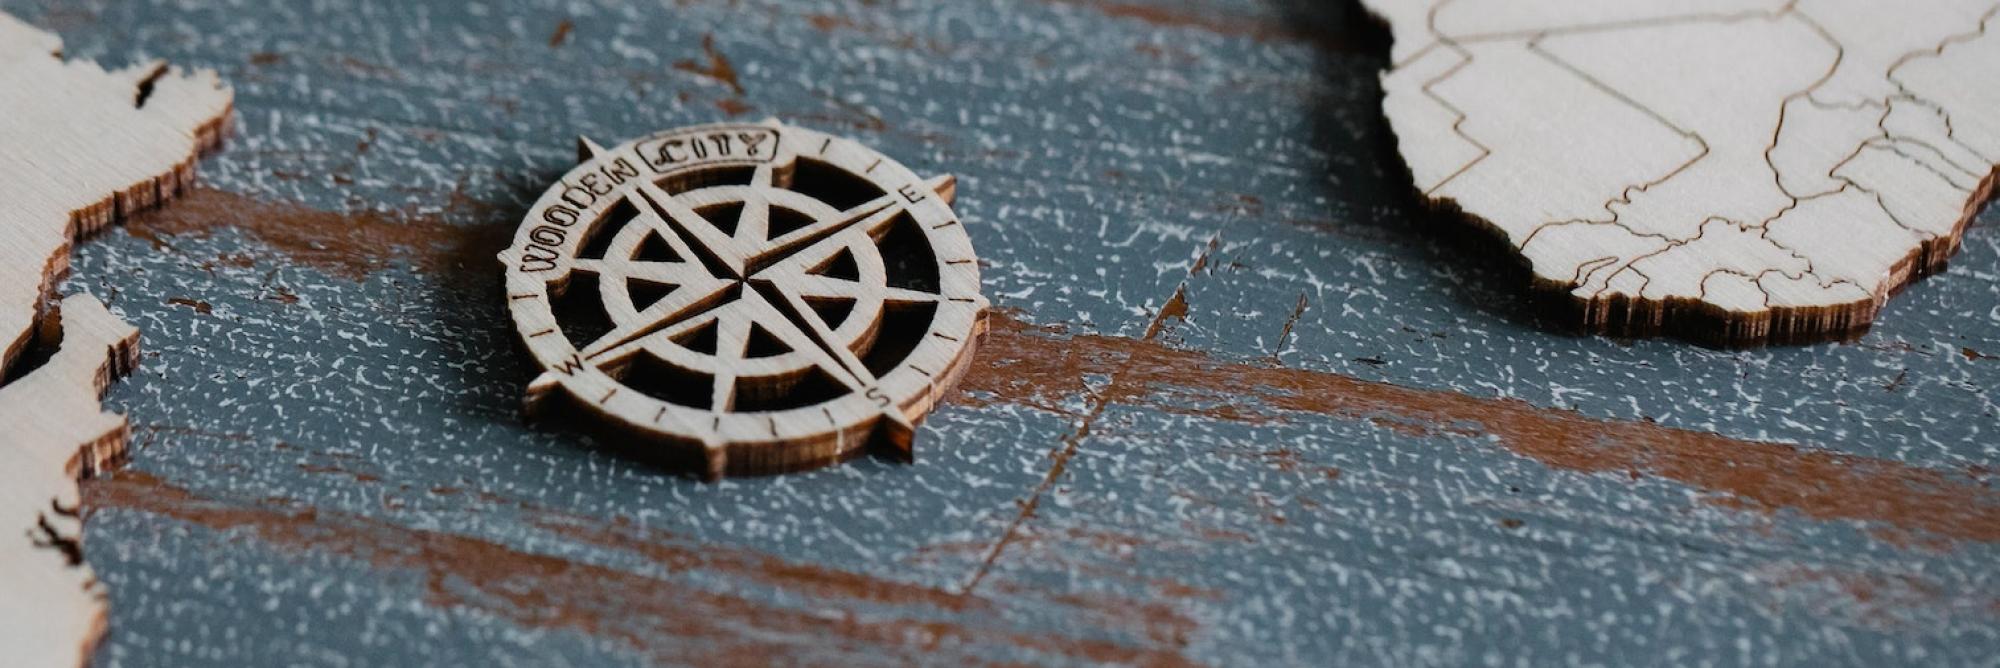 A wooden compass rose sits on a world map